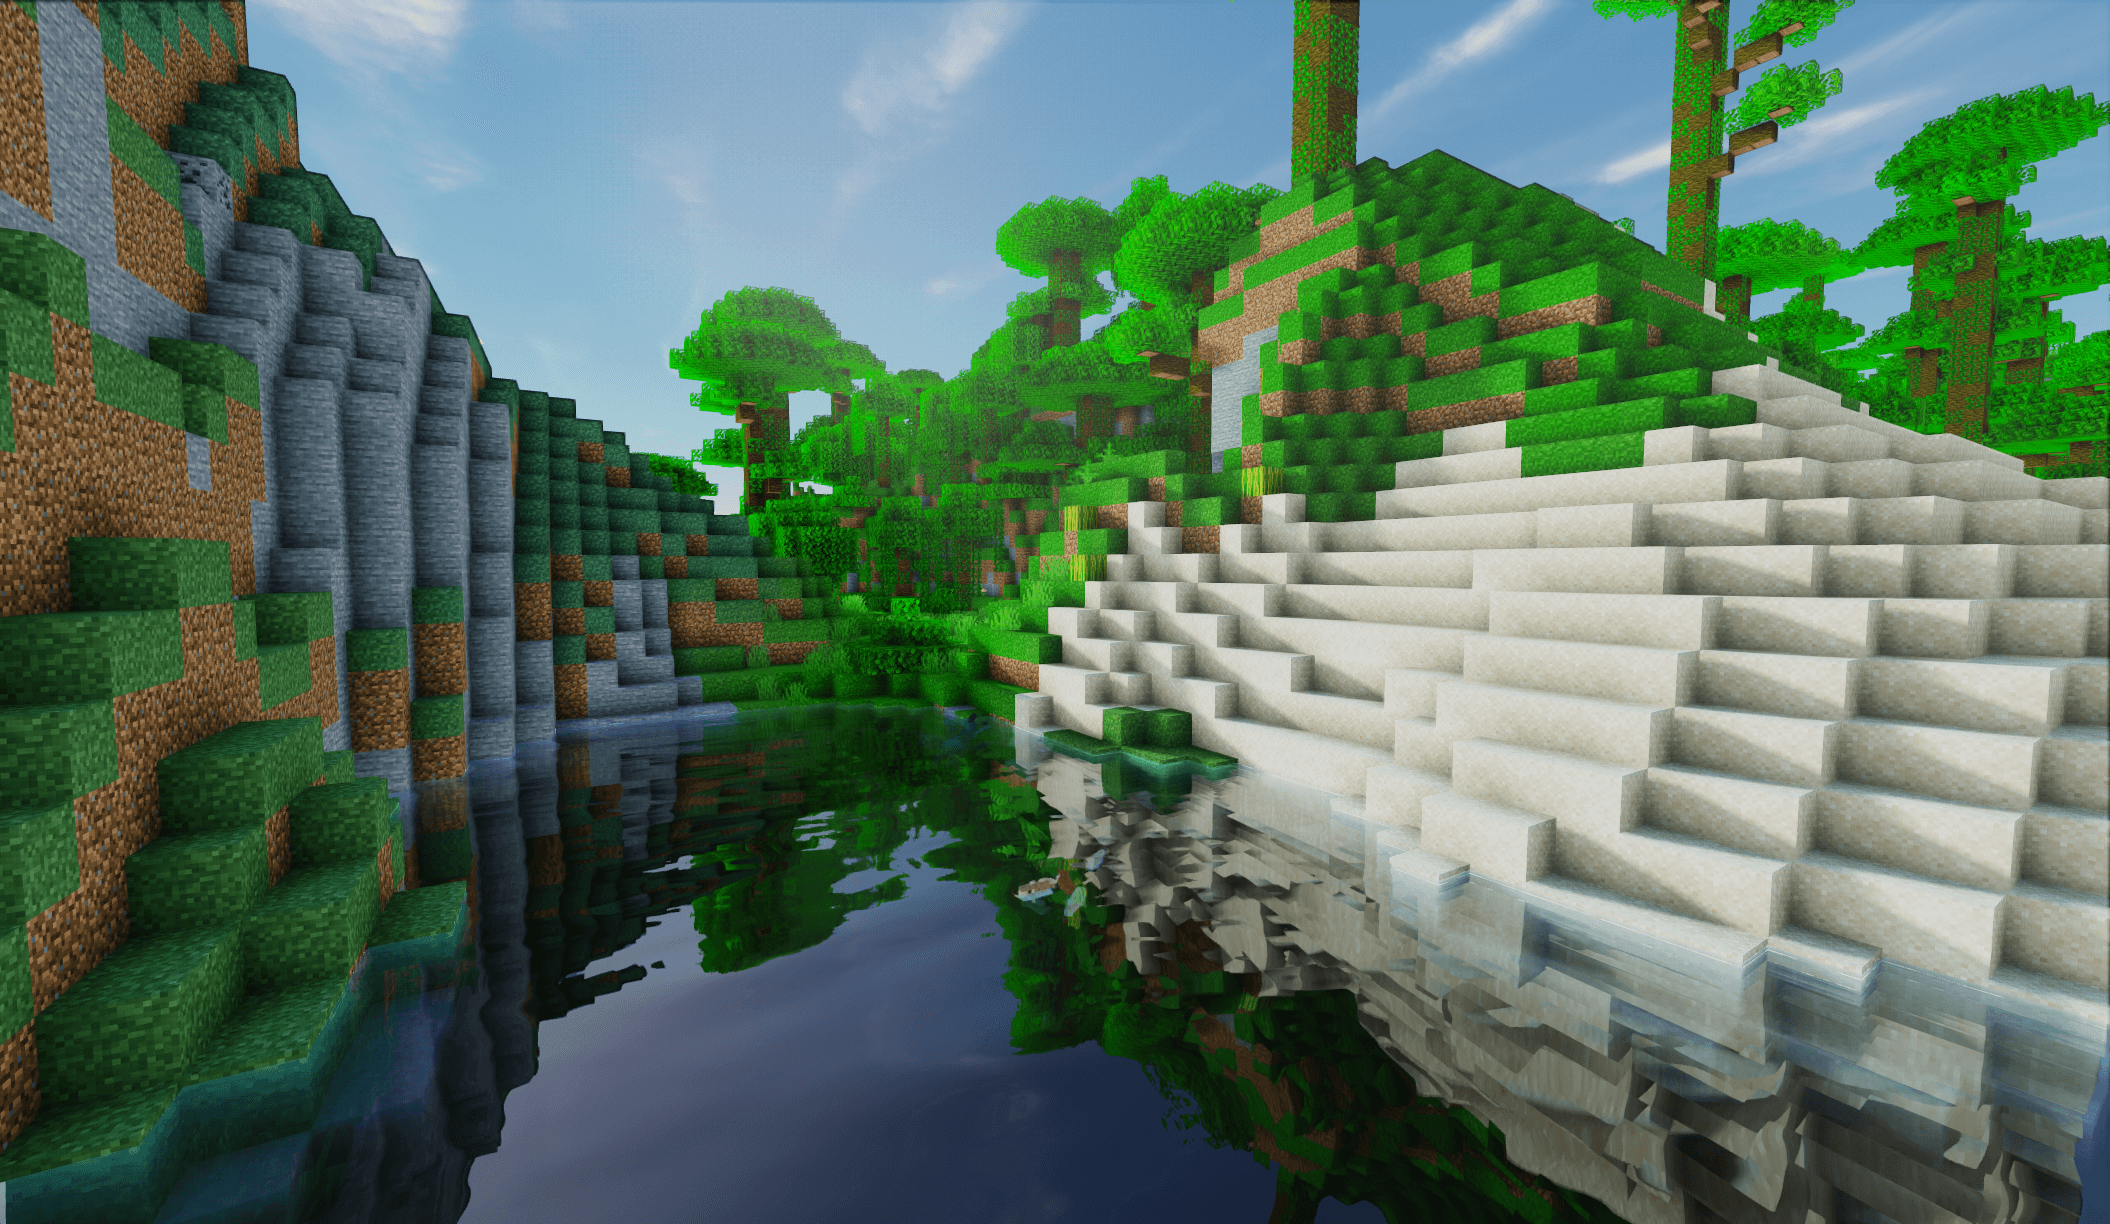 Tutorial - How to Install Shaders for Minecraft 1.16.1 